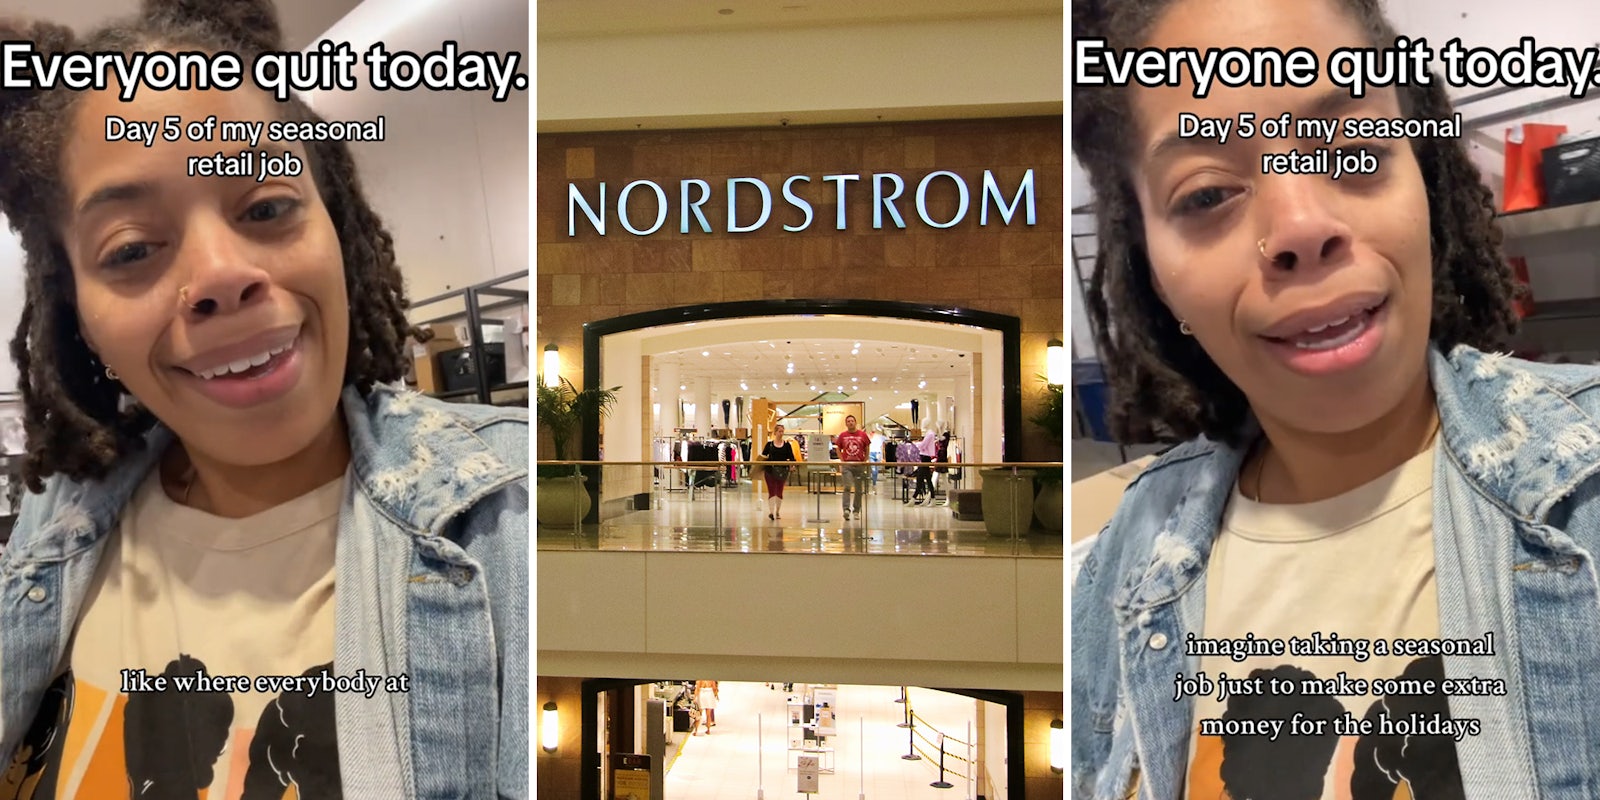 Seasonal Nordstrom worker says everyone else quit on her first week, she doesn’t know what to do